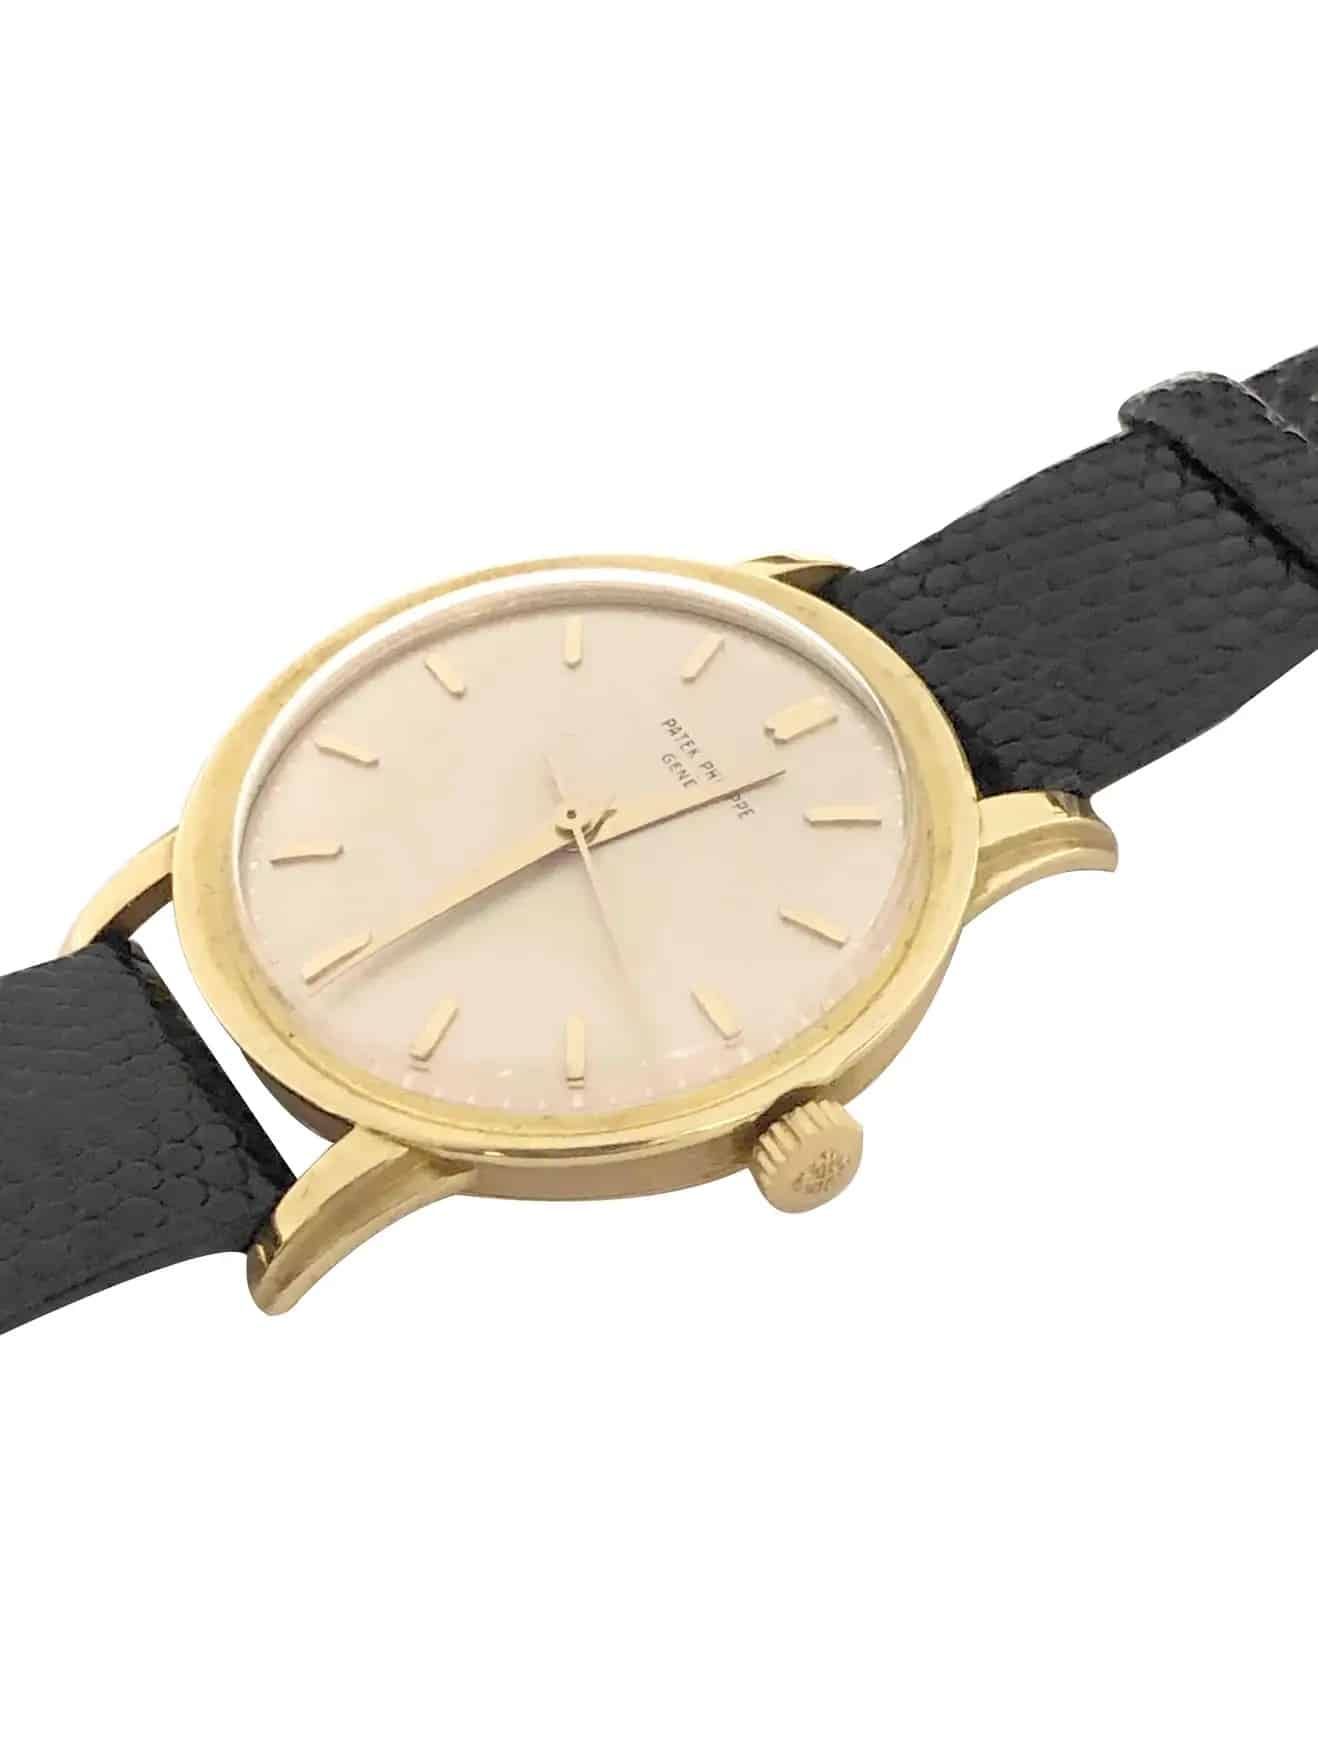 The face of a Patek Philippe 1950s Yellow Gold oversize Manual wind Wristwatch